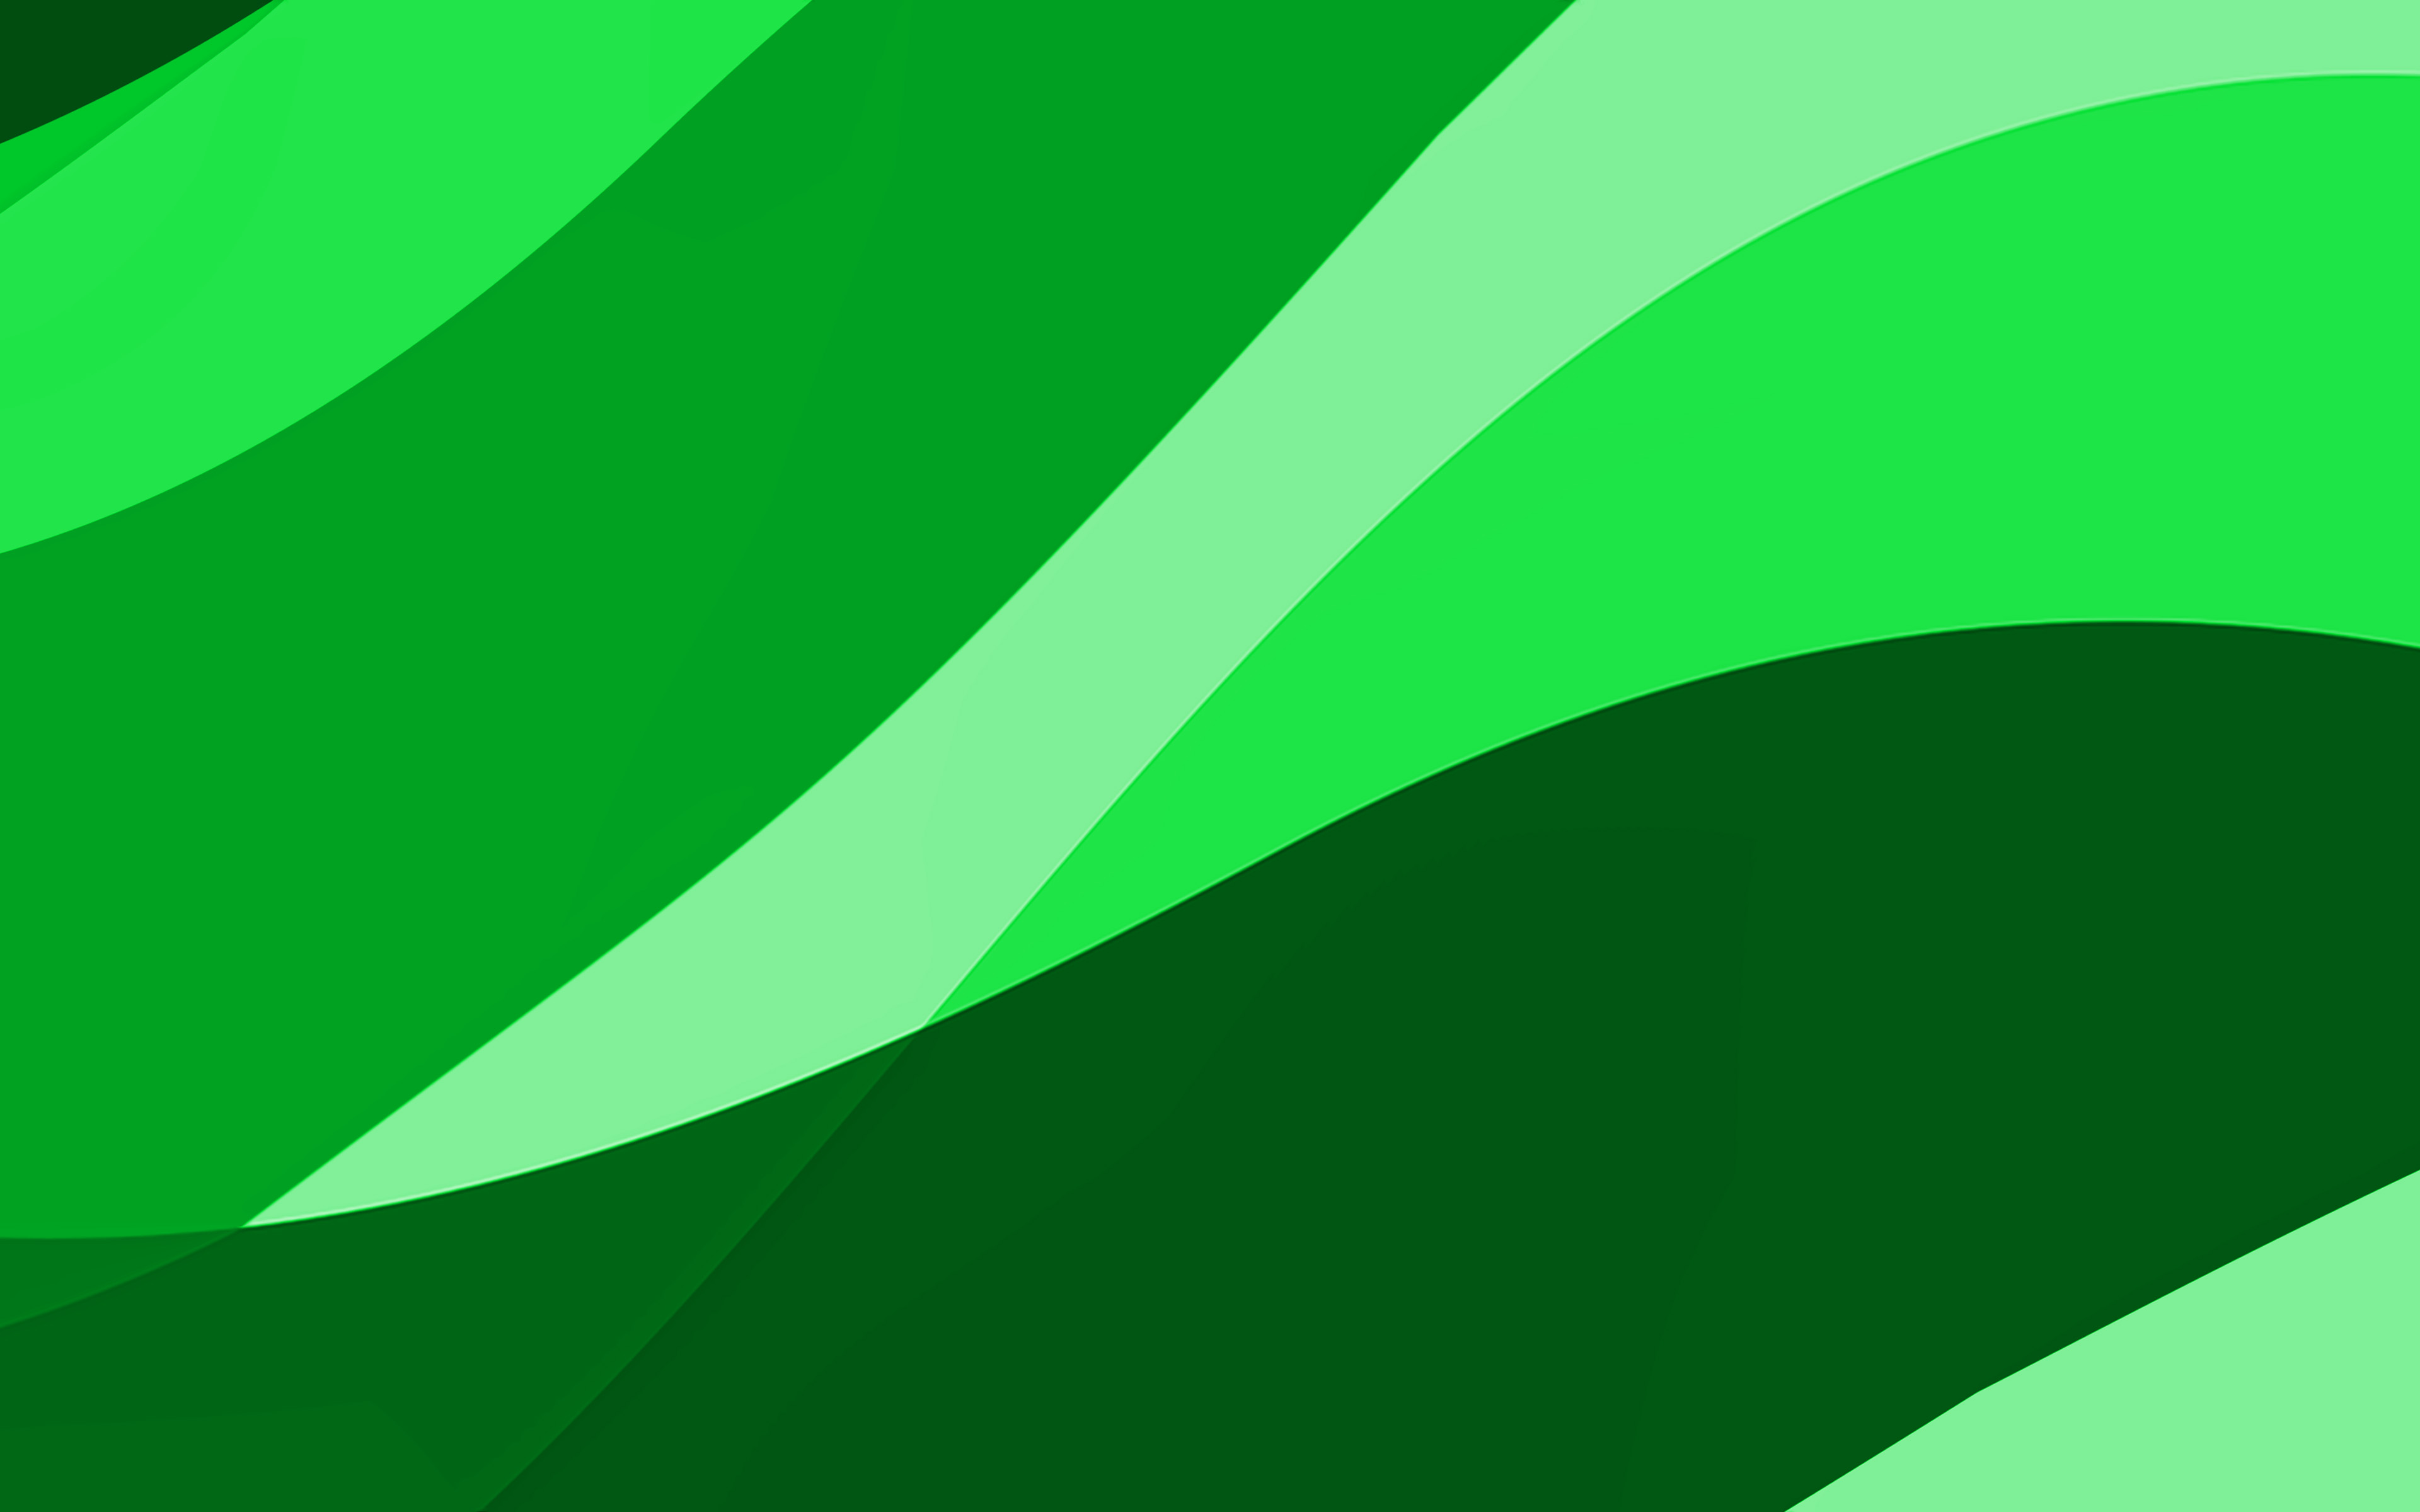 Download wallpaper green abstract waves, 4k, minimal, green wavy background, material design, abstract waves, green background, creative, waves patterns for desktop with resolution 3840x2400. High Quality HD picture wallpaper